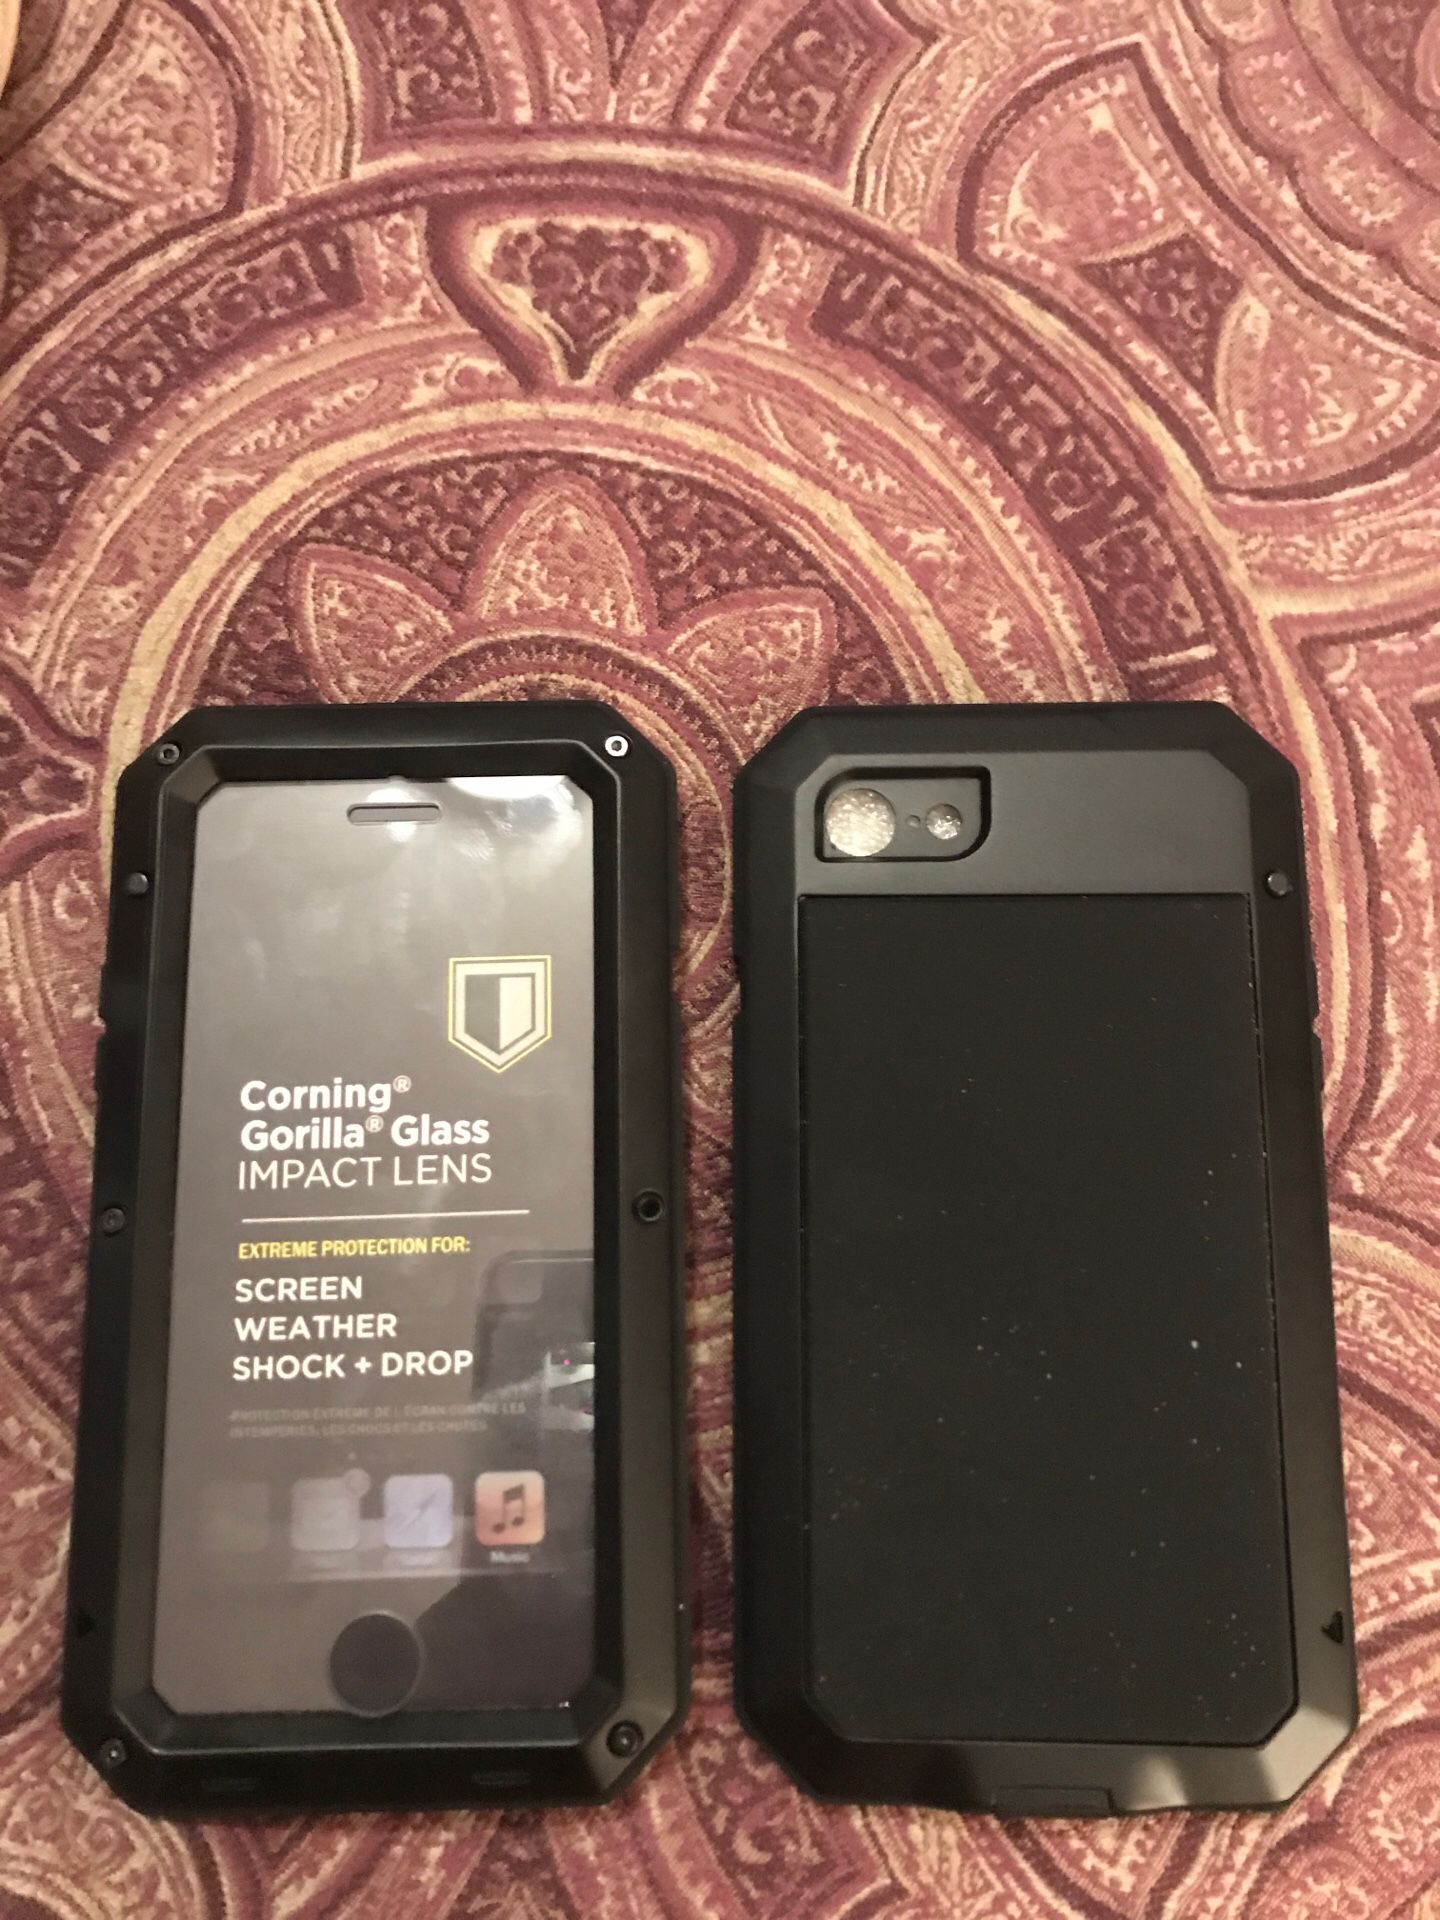 Good cases for iphone from case boss for iphone 7/8 for $80 bought the wrong cases for my son